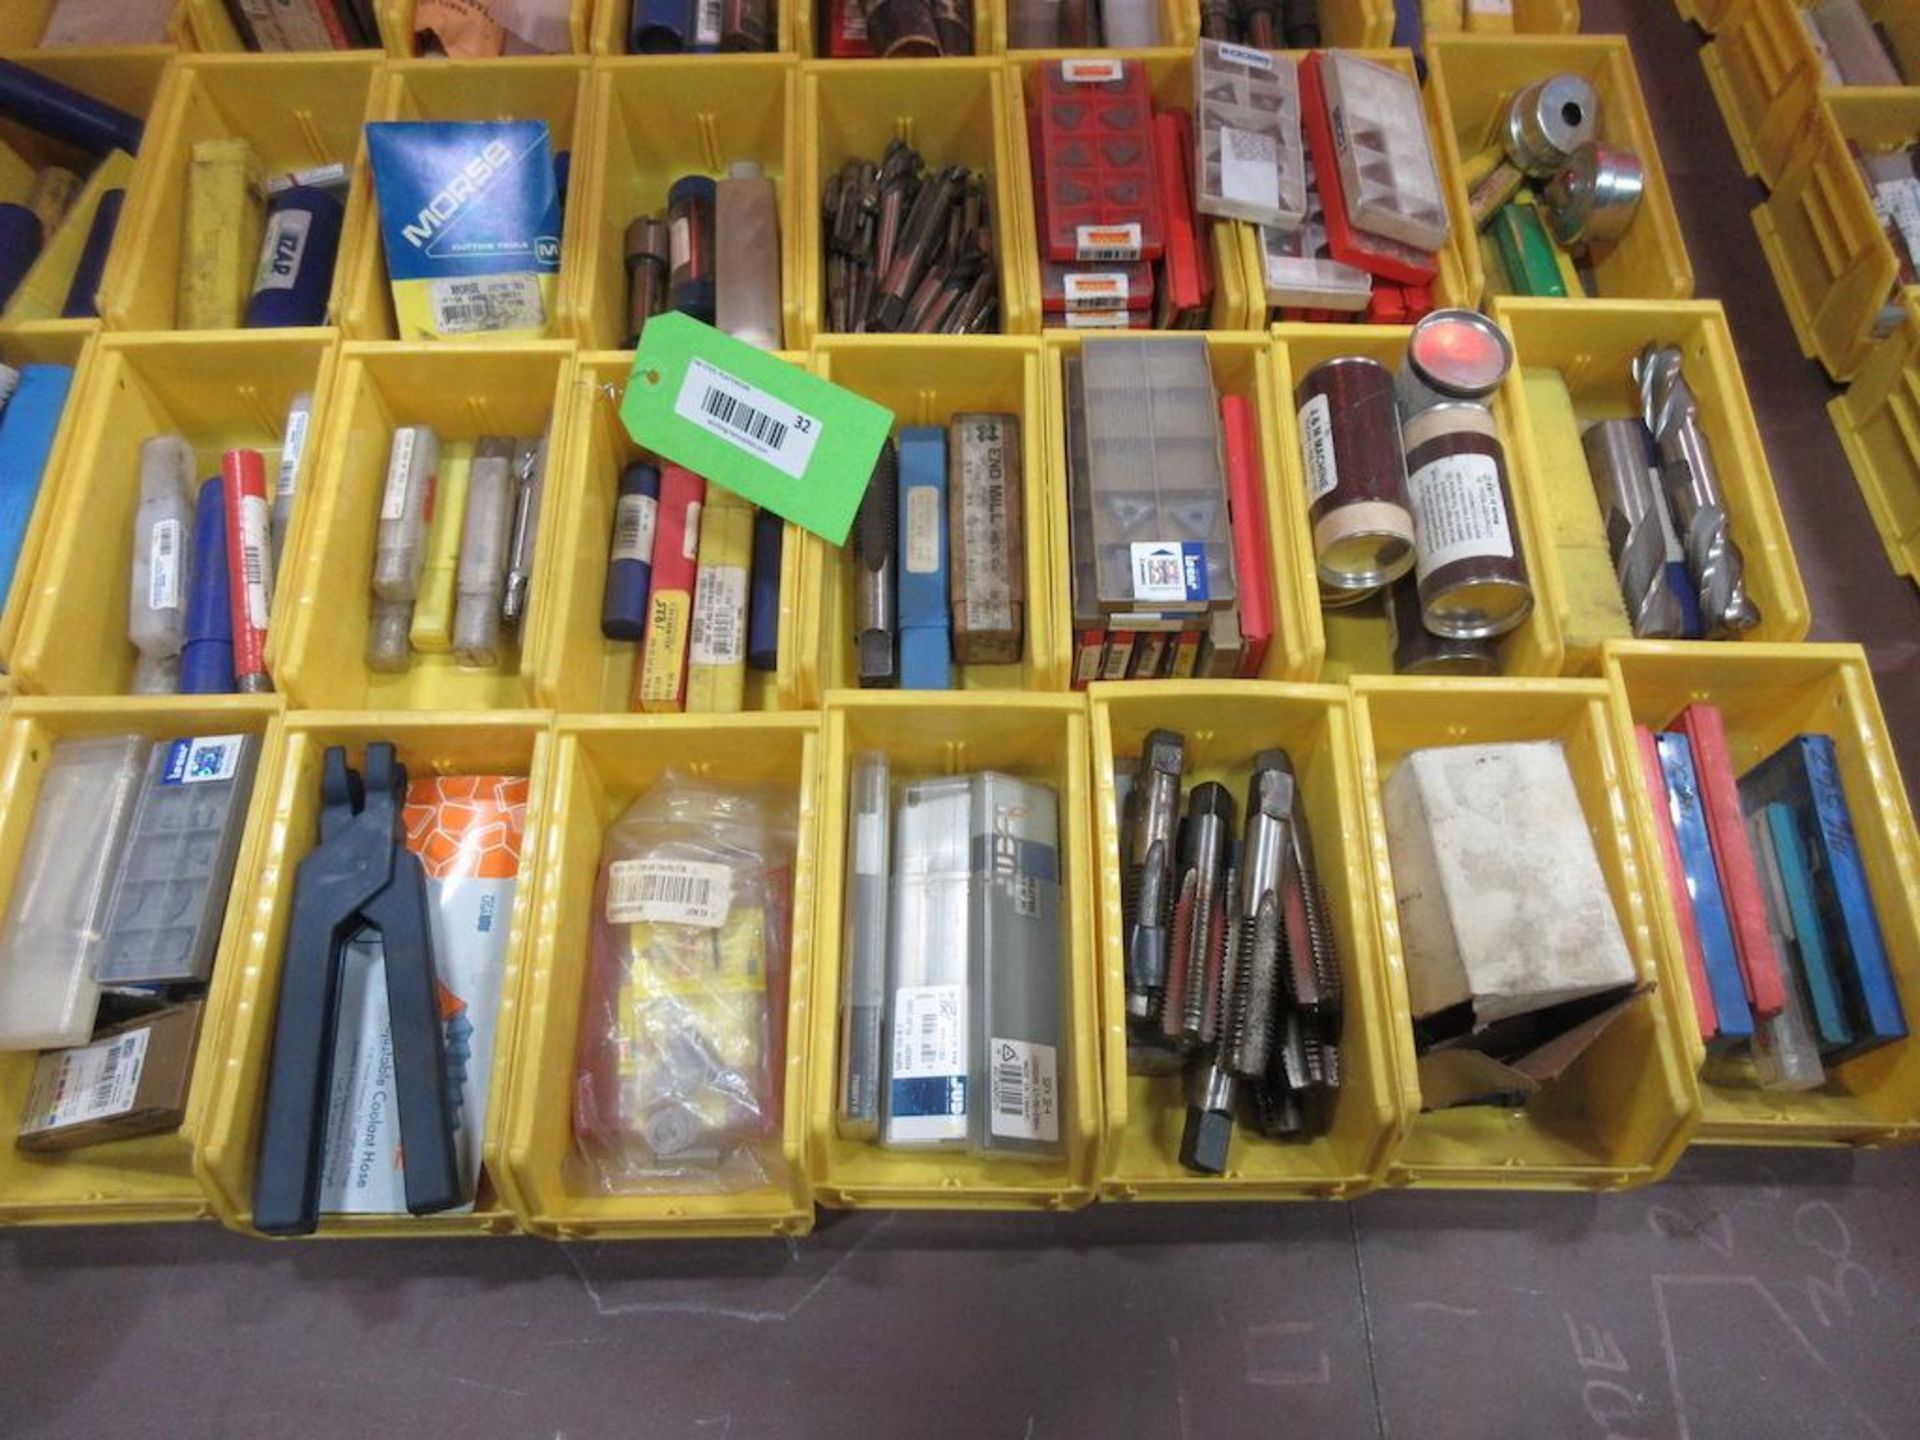 (32) BINS ASSORTED CUTTING TOOLS, ISCAR, SANDVIK, SECO, MORSE, REAMERS, CUTTERS ETC. - Image 3 of 3